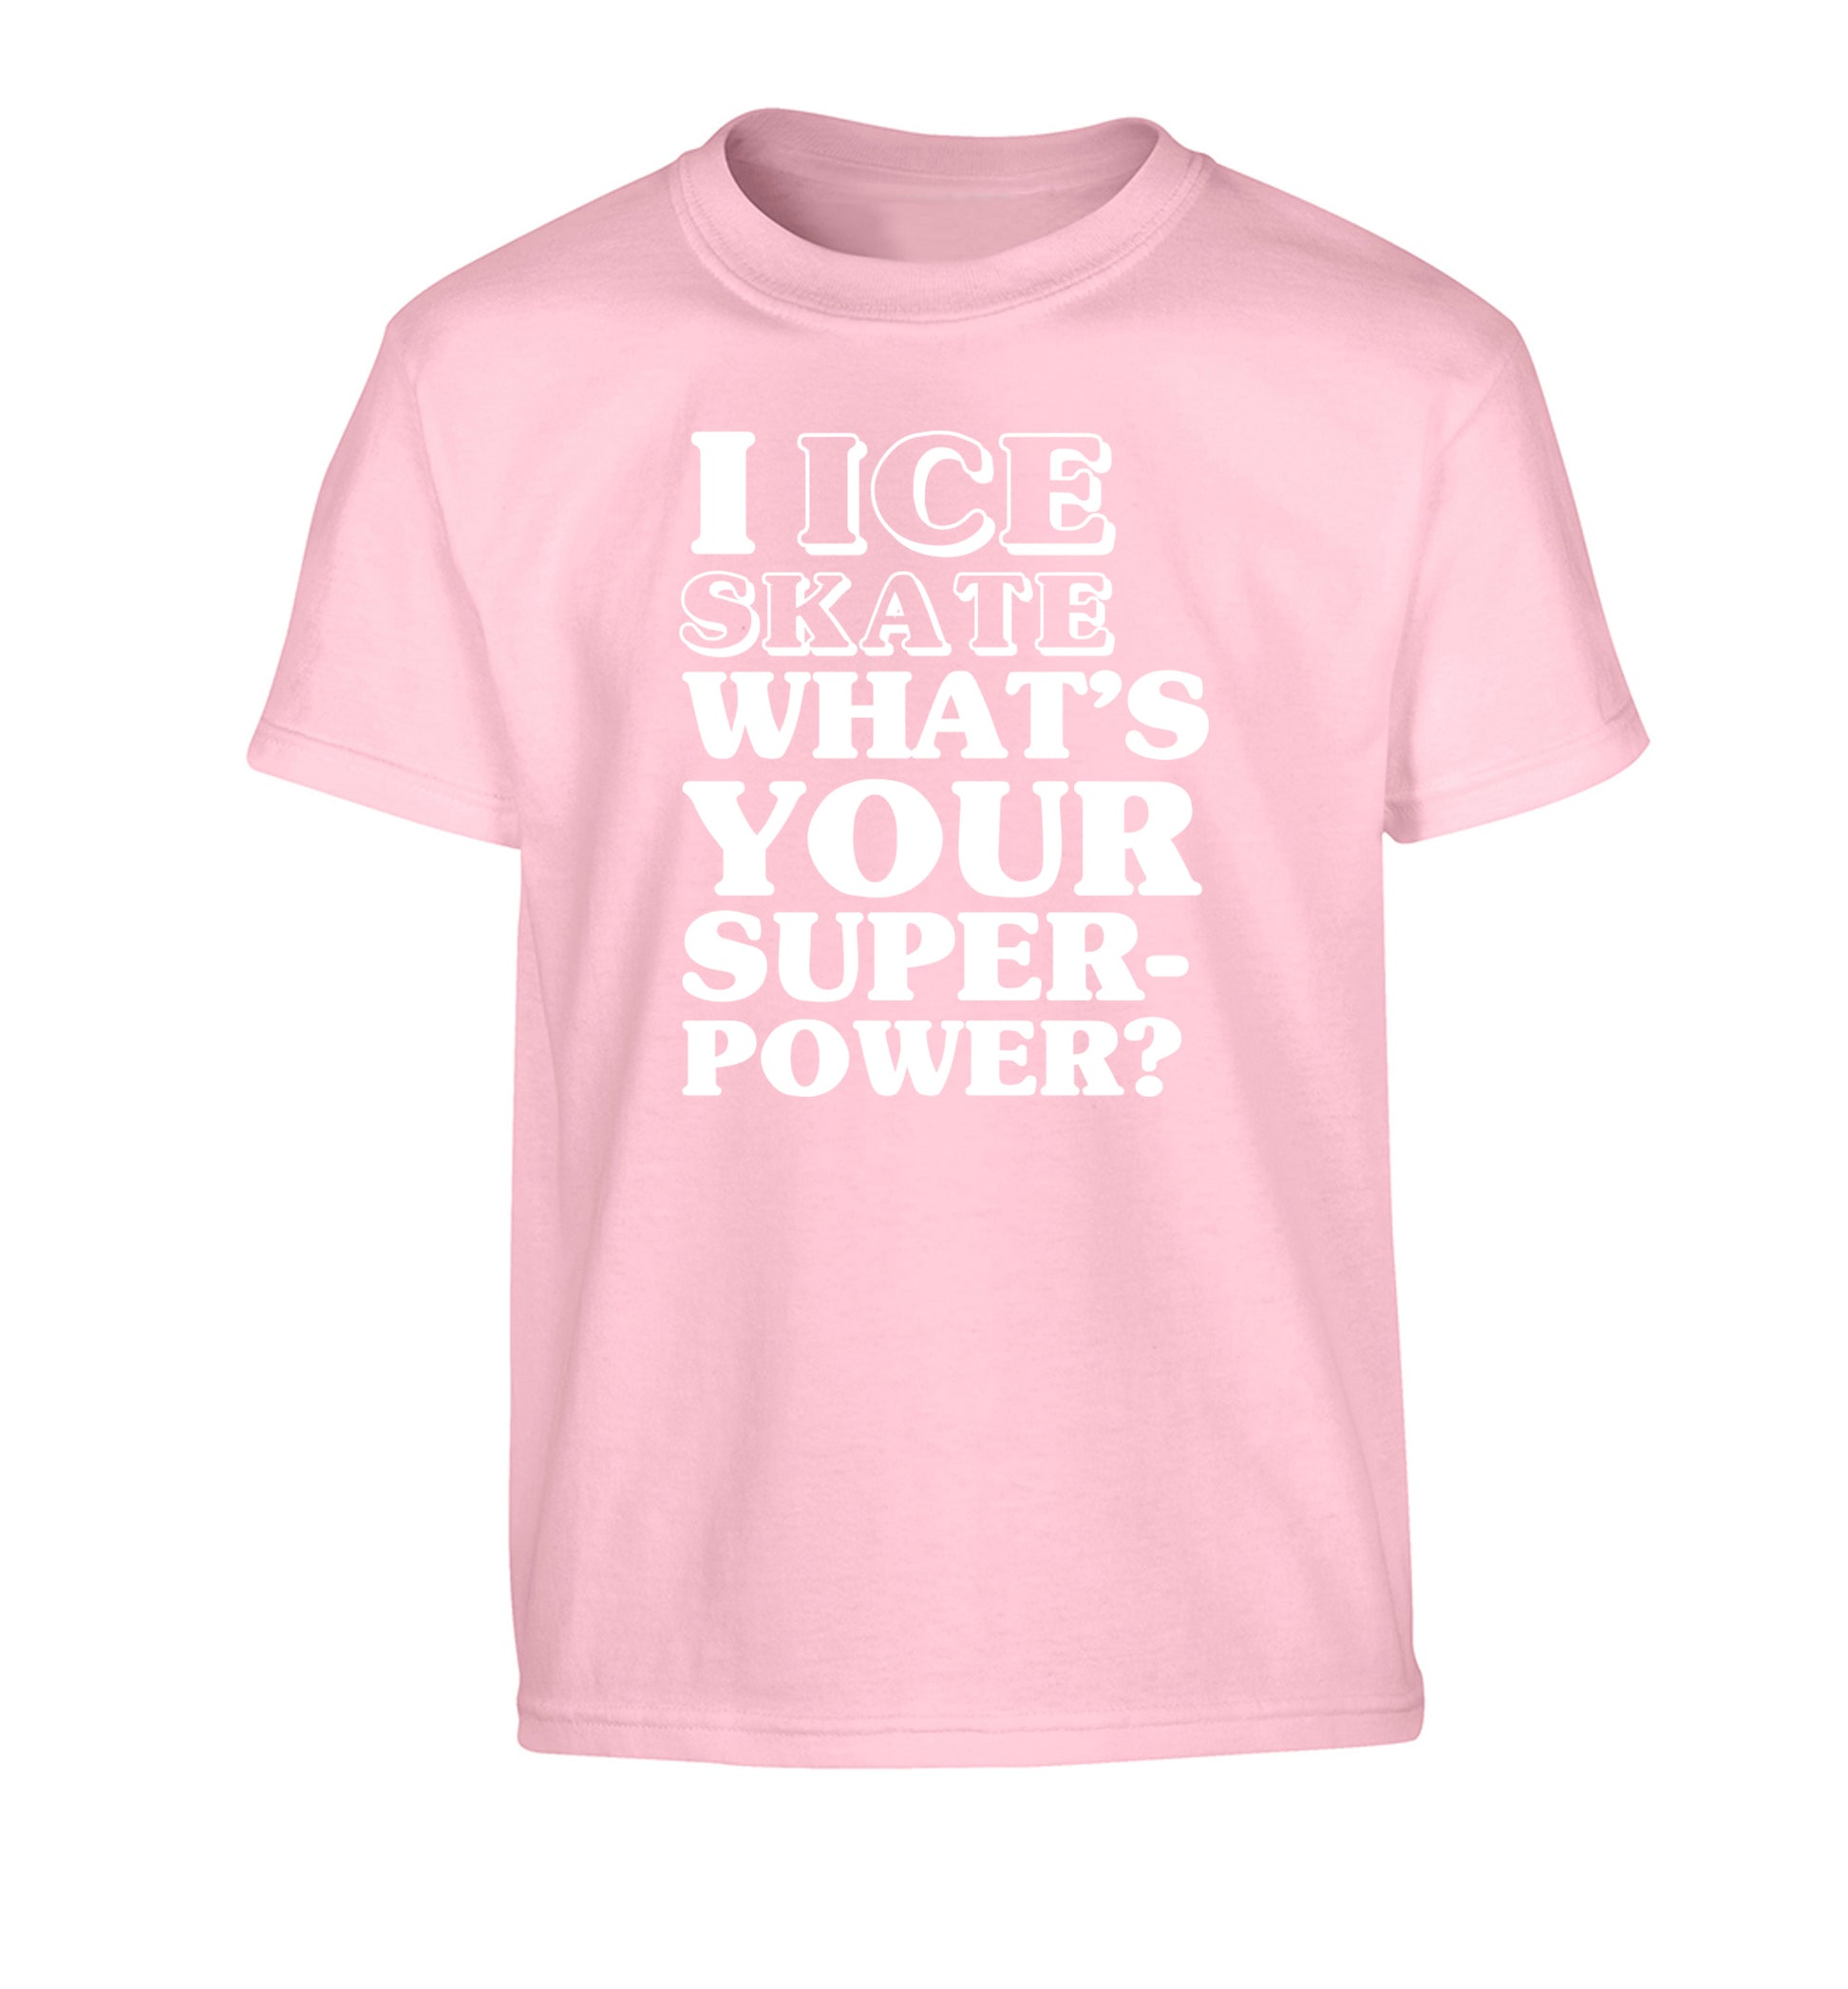 I ice skate what's your superpower? Children's light pink Tshirt 12-14 Years